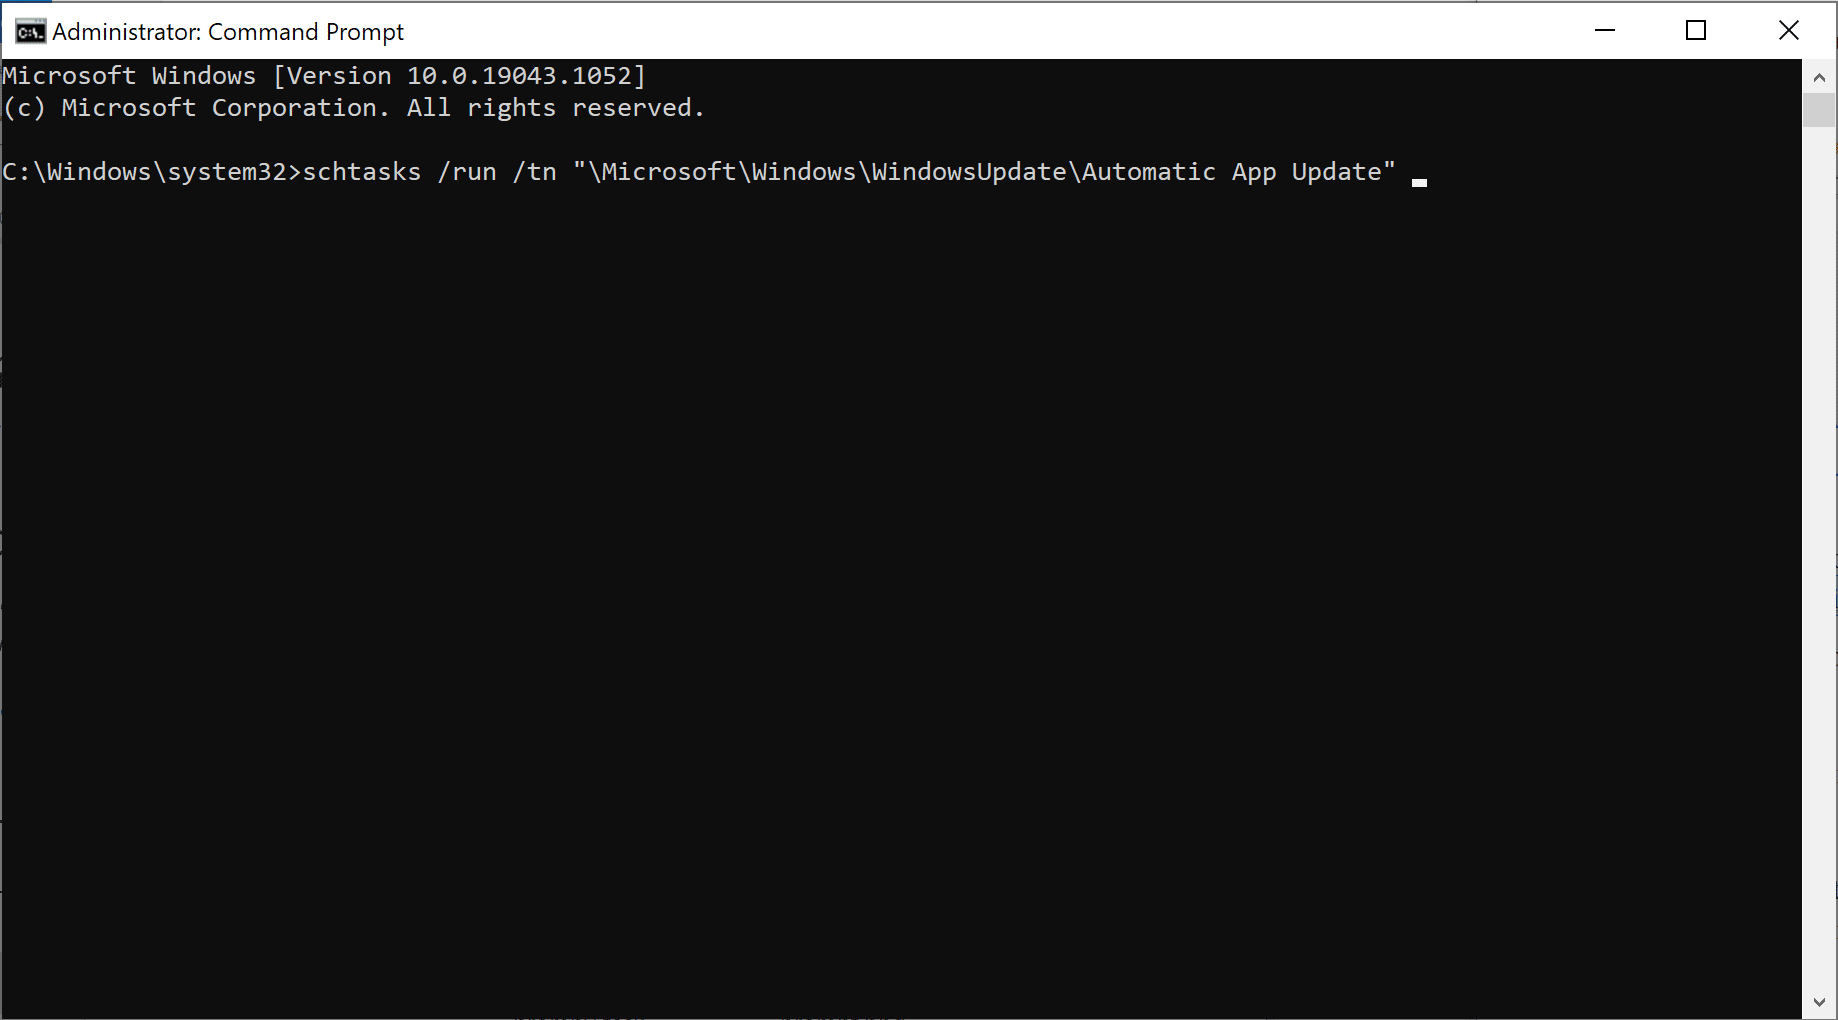 To Update microsoft store type the command in the command prompt